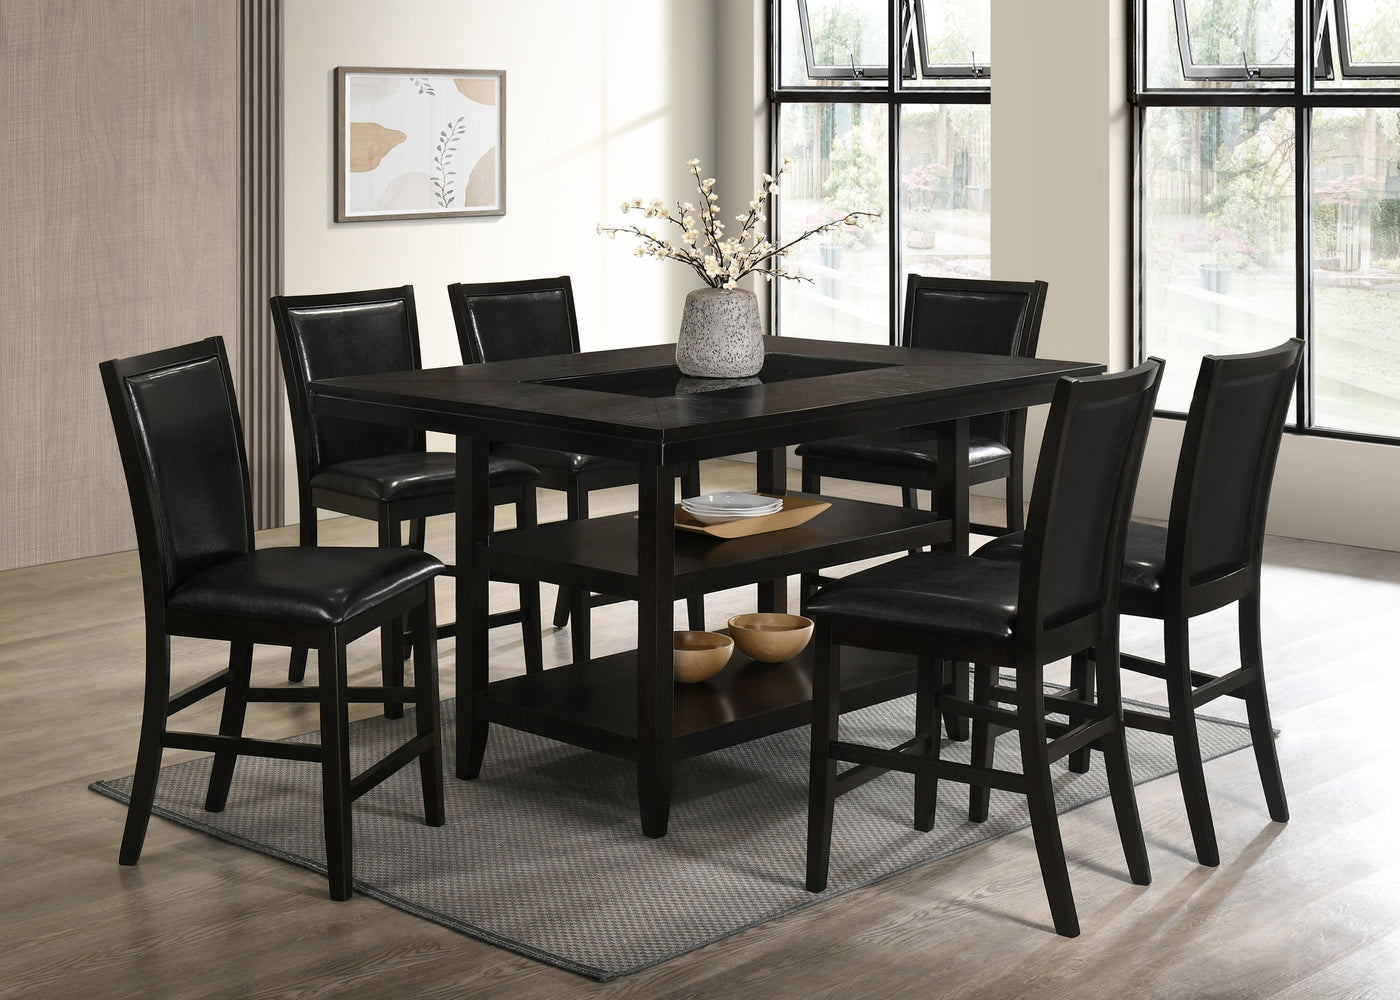 CondorPU - Counter Height Table & 6 Chairs